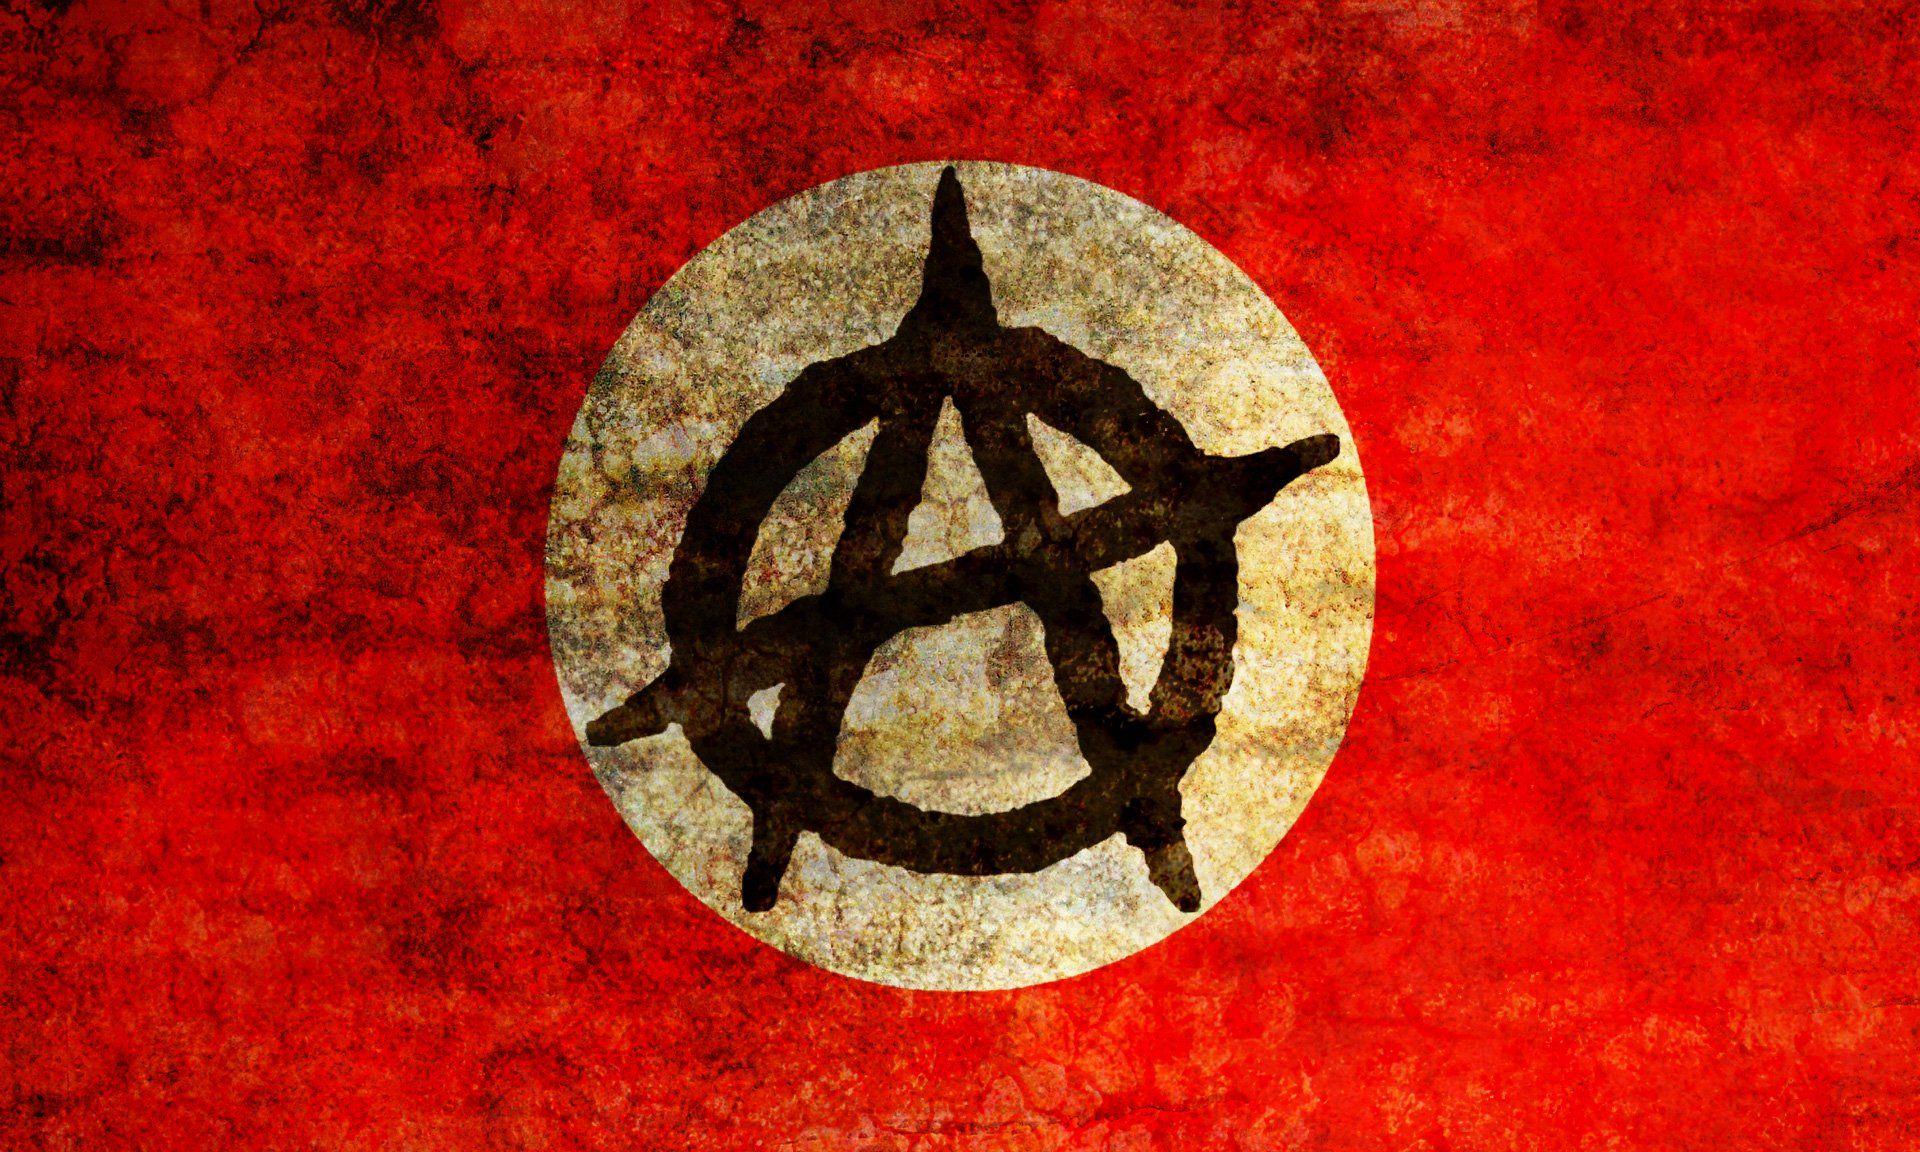 Update more than 79 anarchy wallpaper - in.cdgdbentre